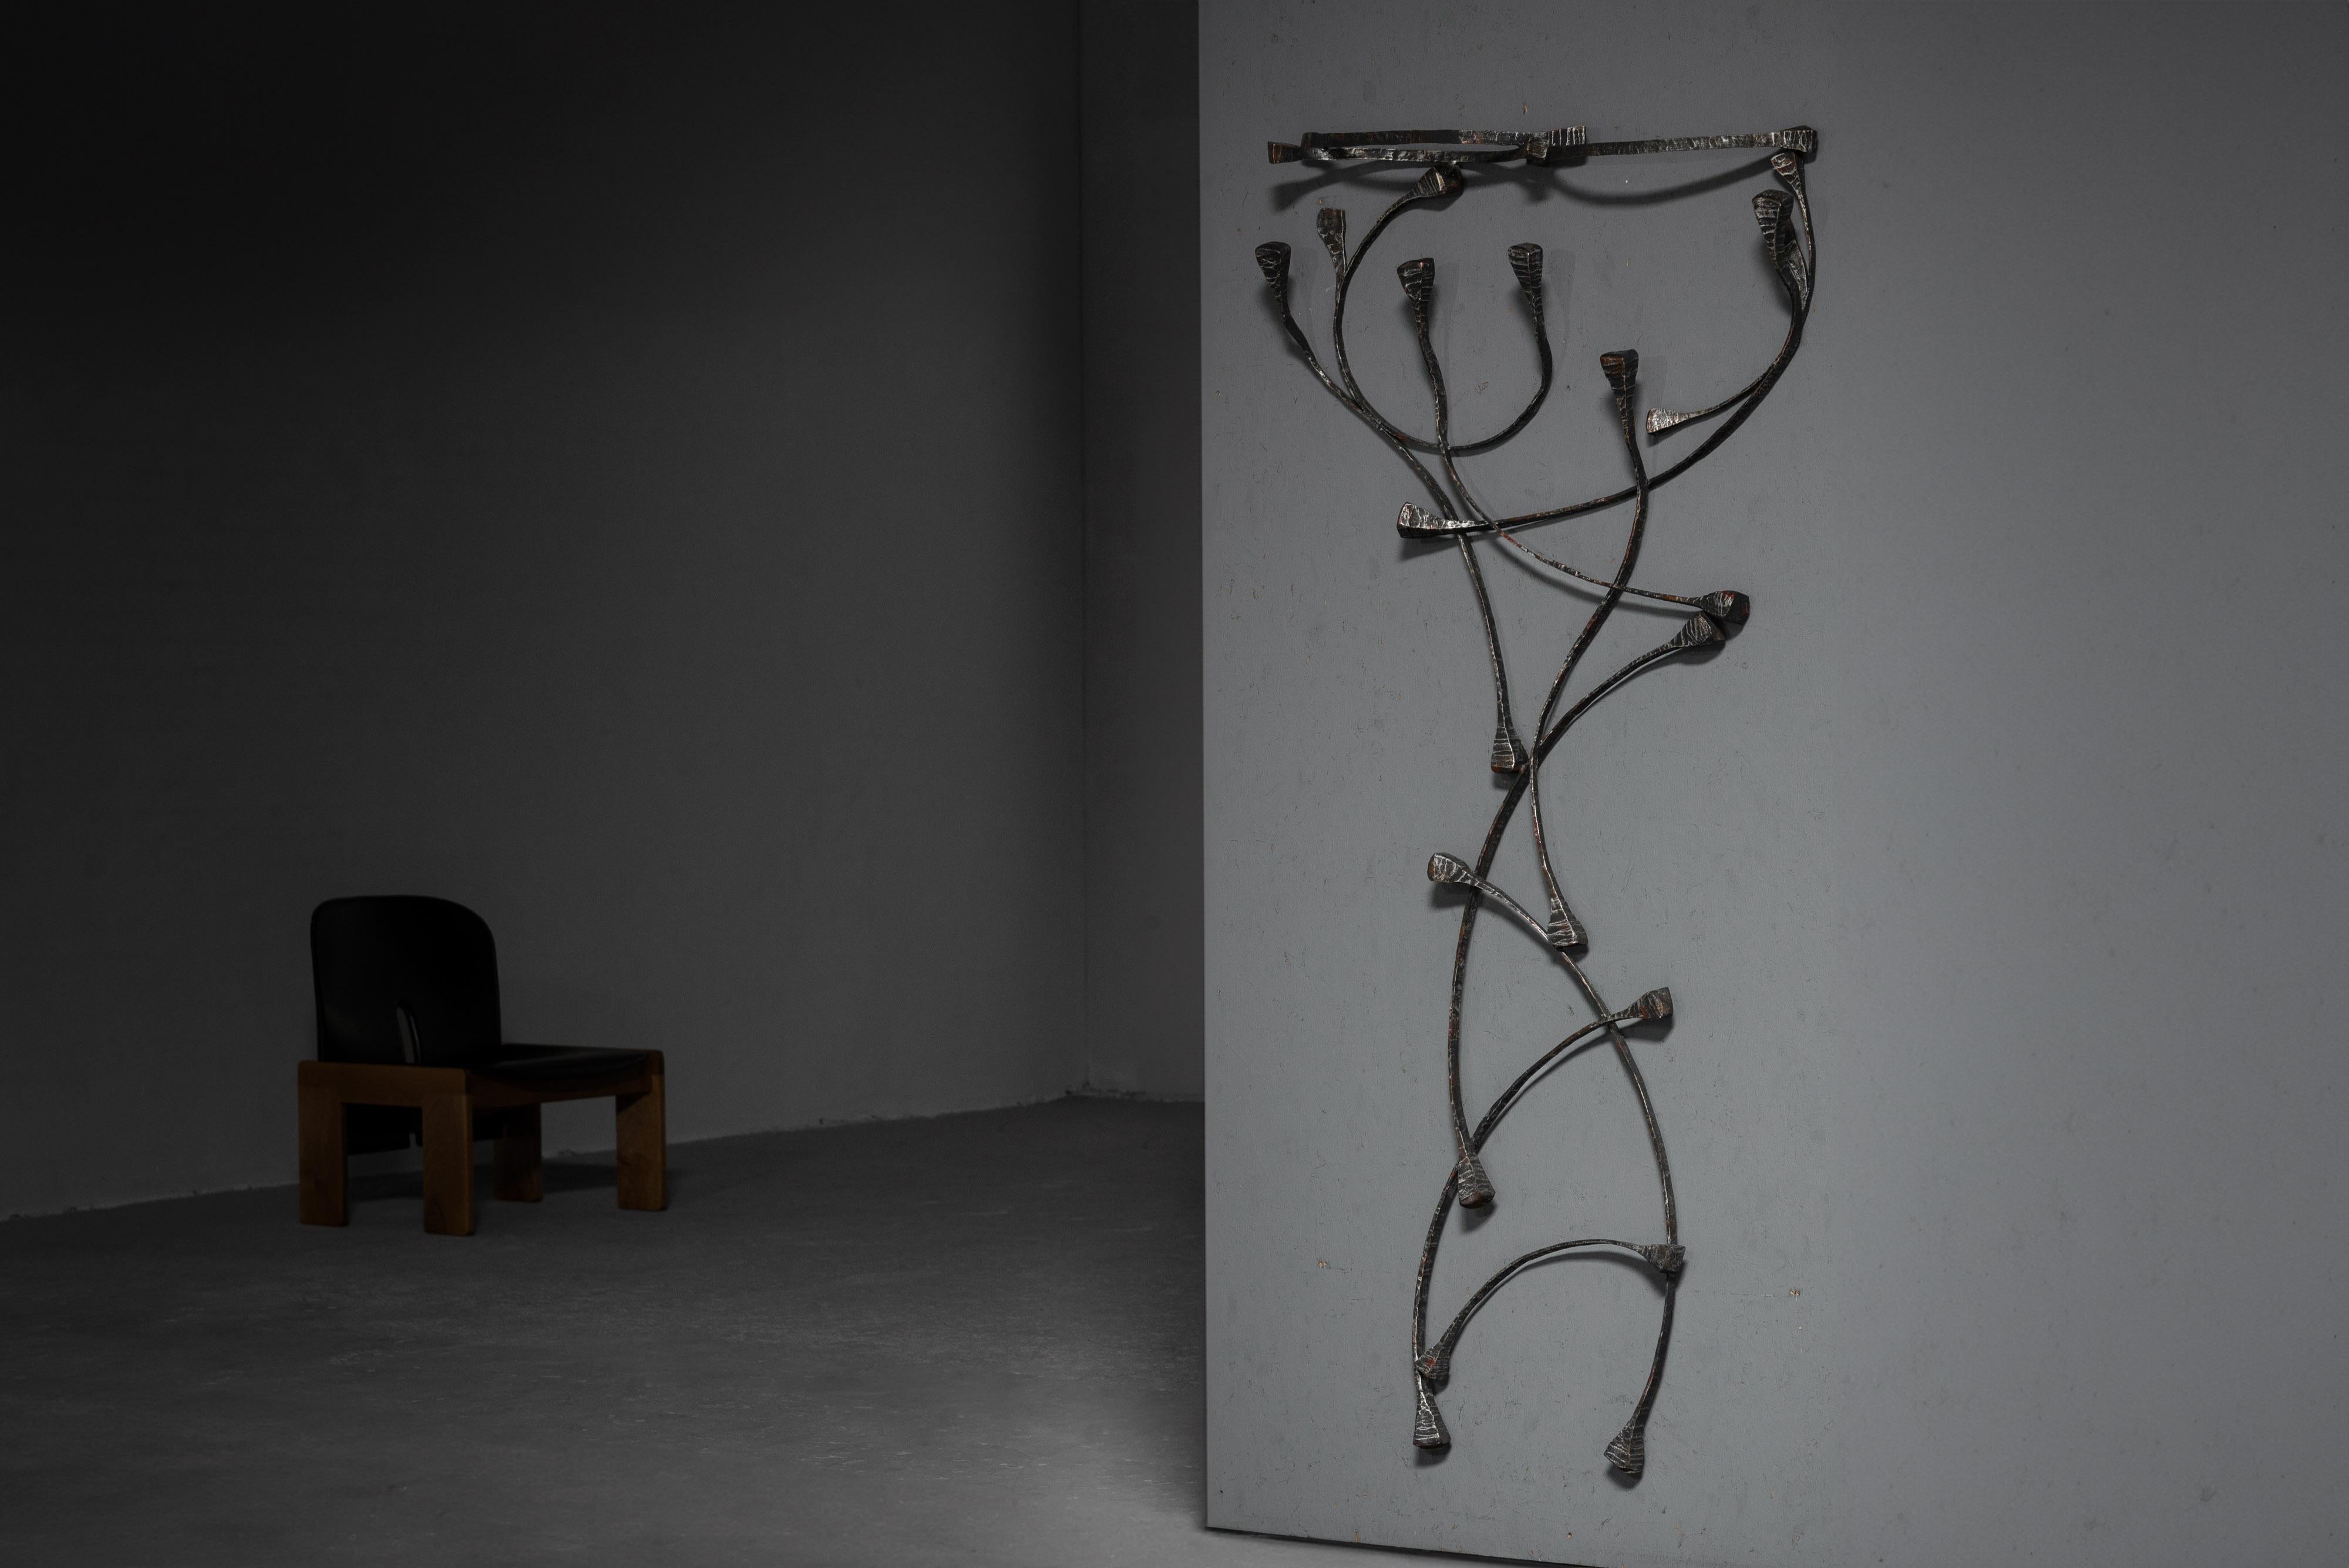 Sculptural coat rack designed by Salvino Marsura and made in his own atelier in Italy in 1970. This coat rack is both a work of art as a functional piece made from wrought iron that's been meticulously hammered and welded, resulting in a strikingly